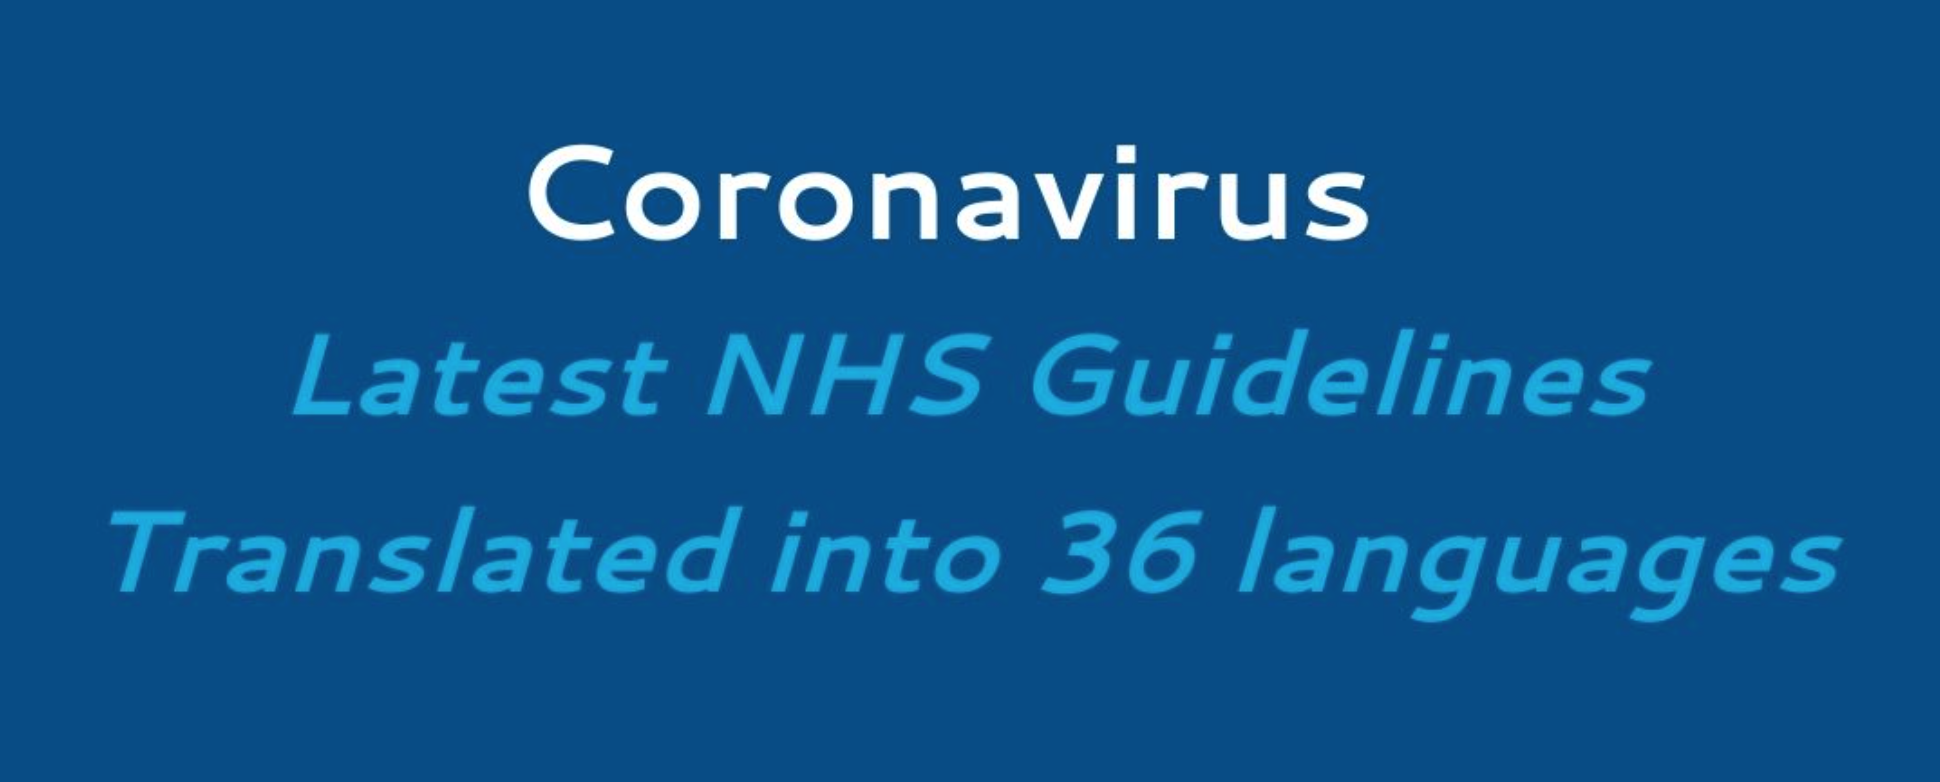 You are currently viewing Coronavirus Information